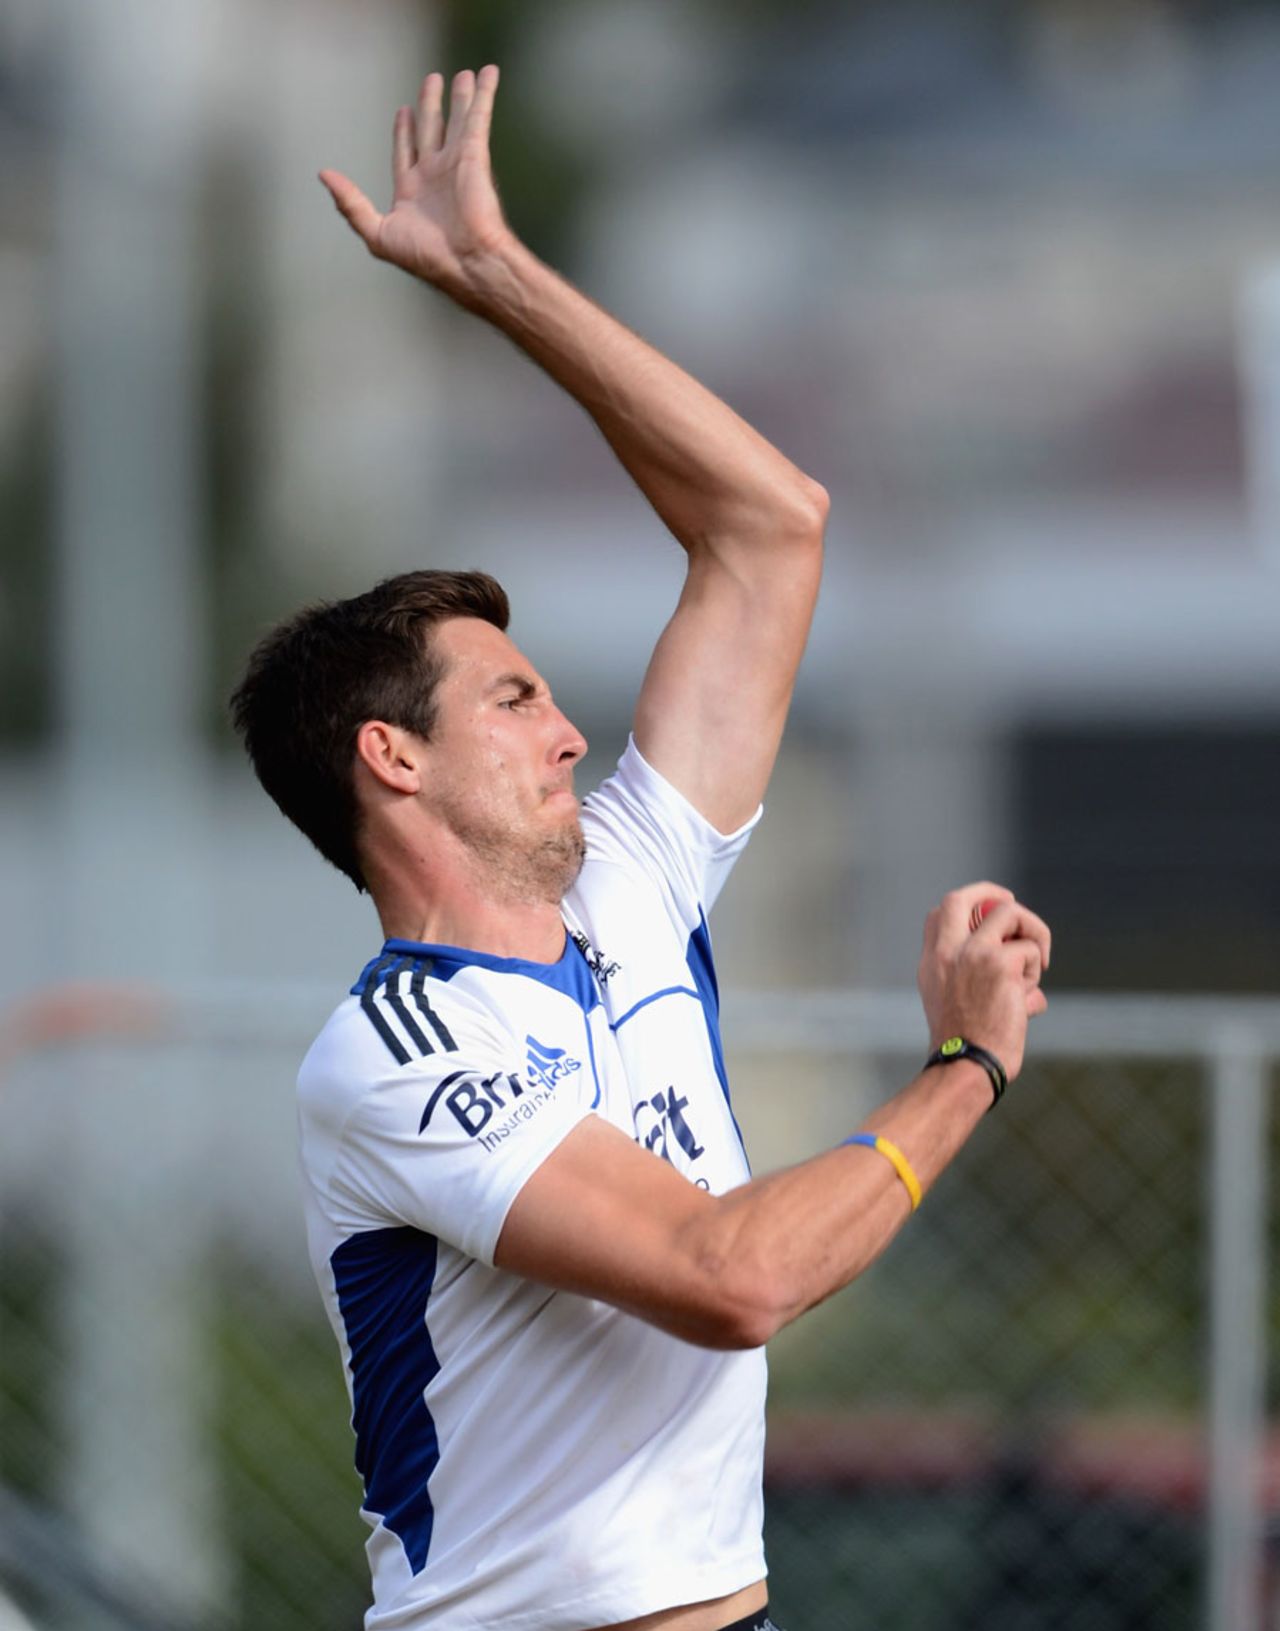 Steven Finn bowls during a practice session in Dunedin, England's tour of New Zealand, March 4, 2013